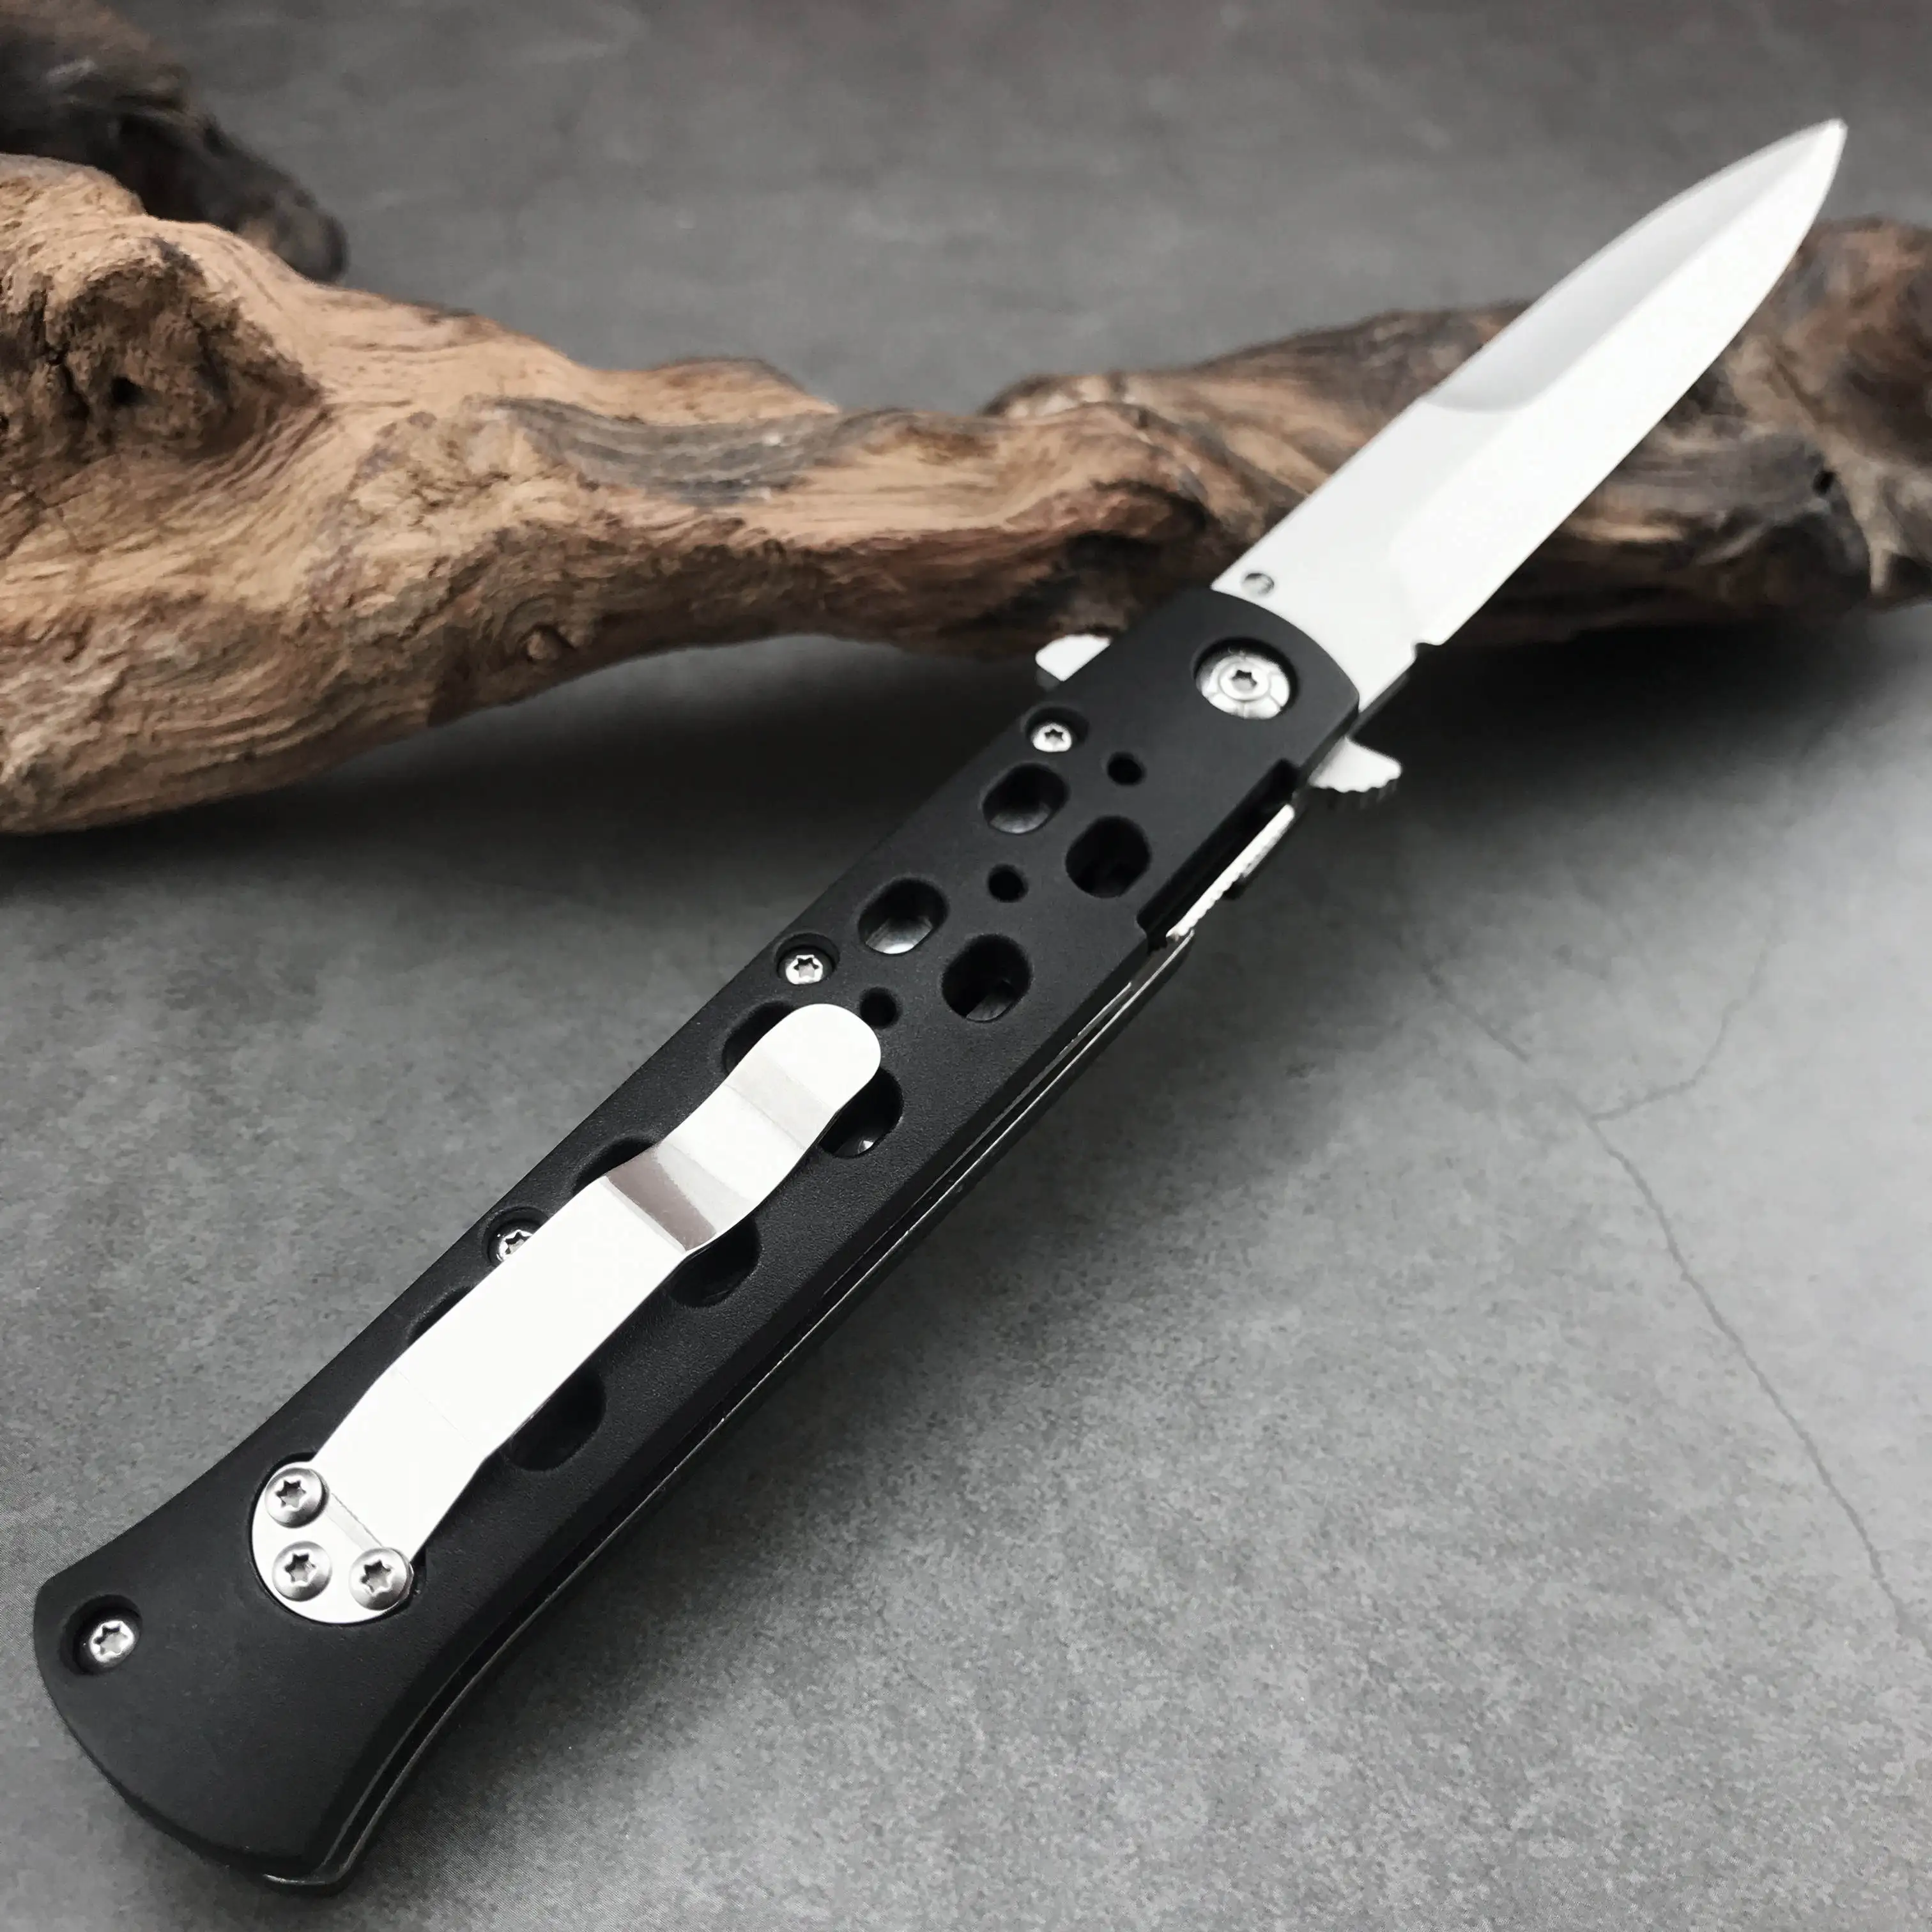 

Cold Steel-26S CS26S Ti-Lite Pocket Folding Knife Nylon Handle Outdoor Survival Hunting Camping Tactical Tools Assisted Opening